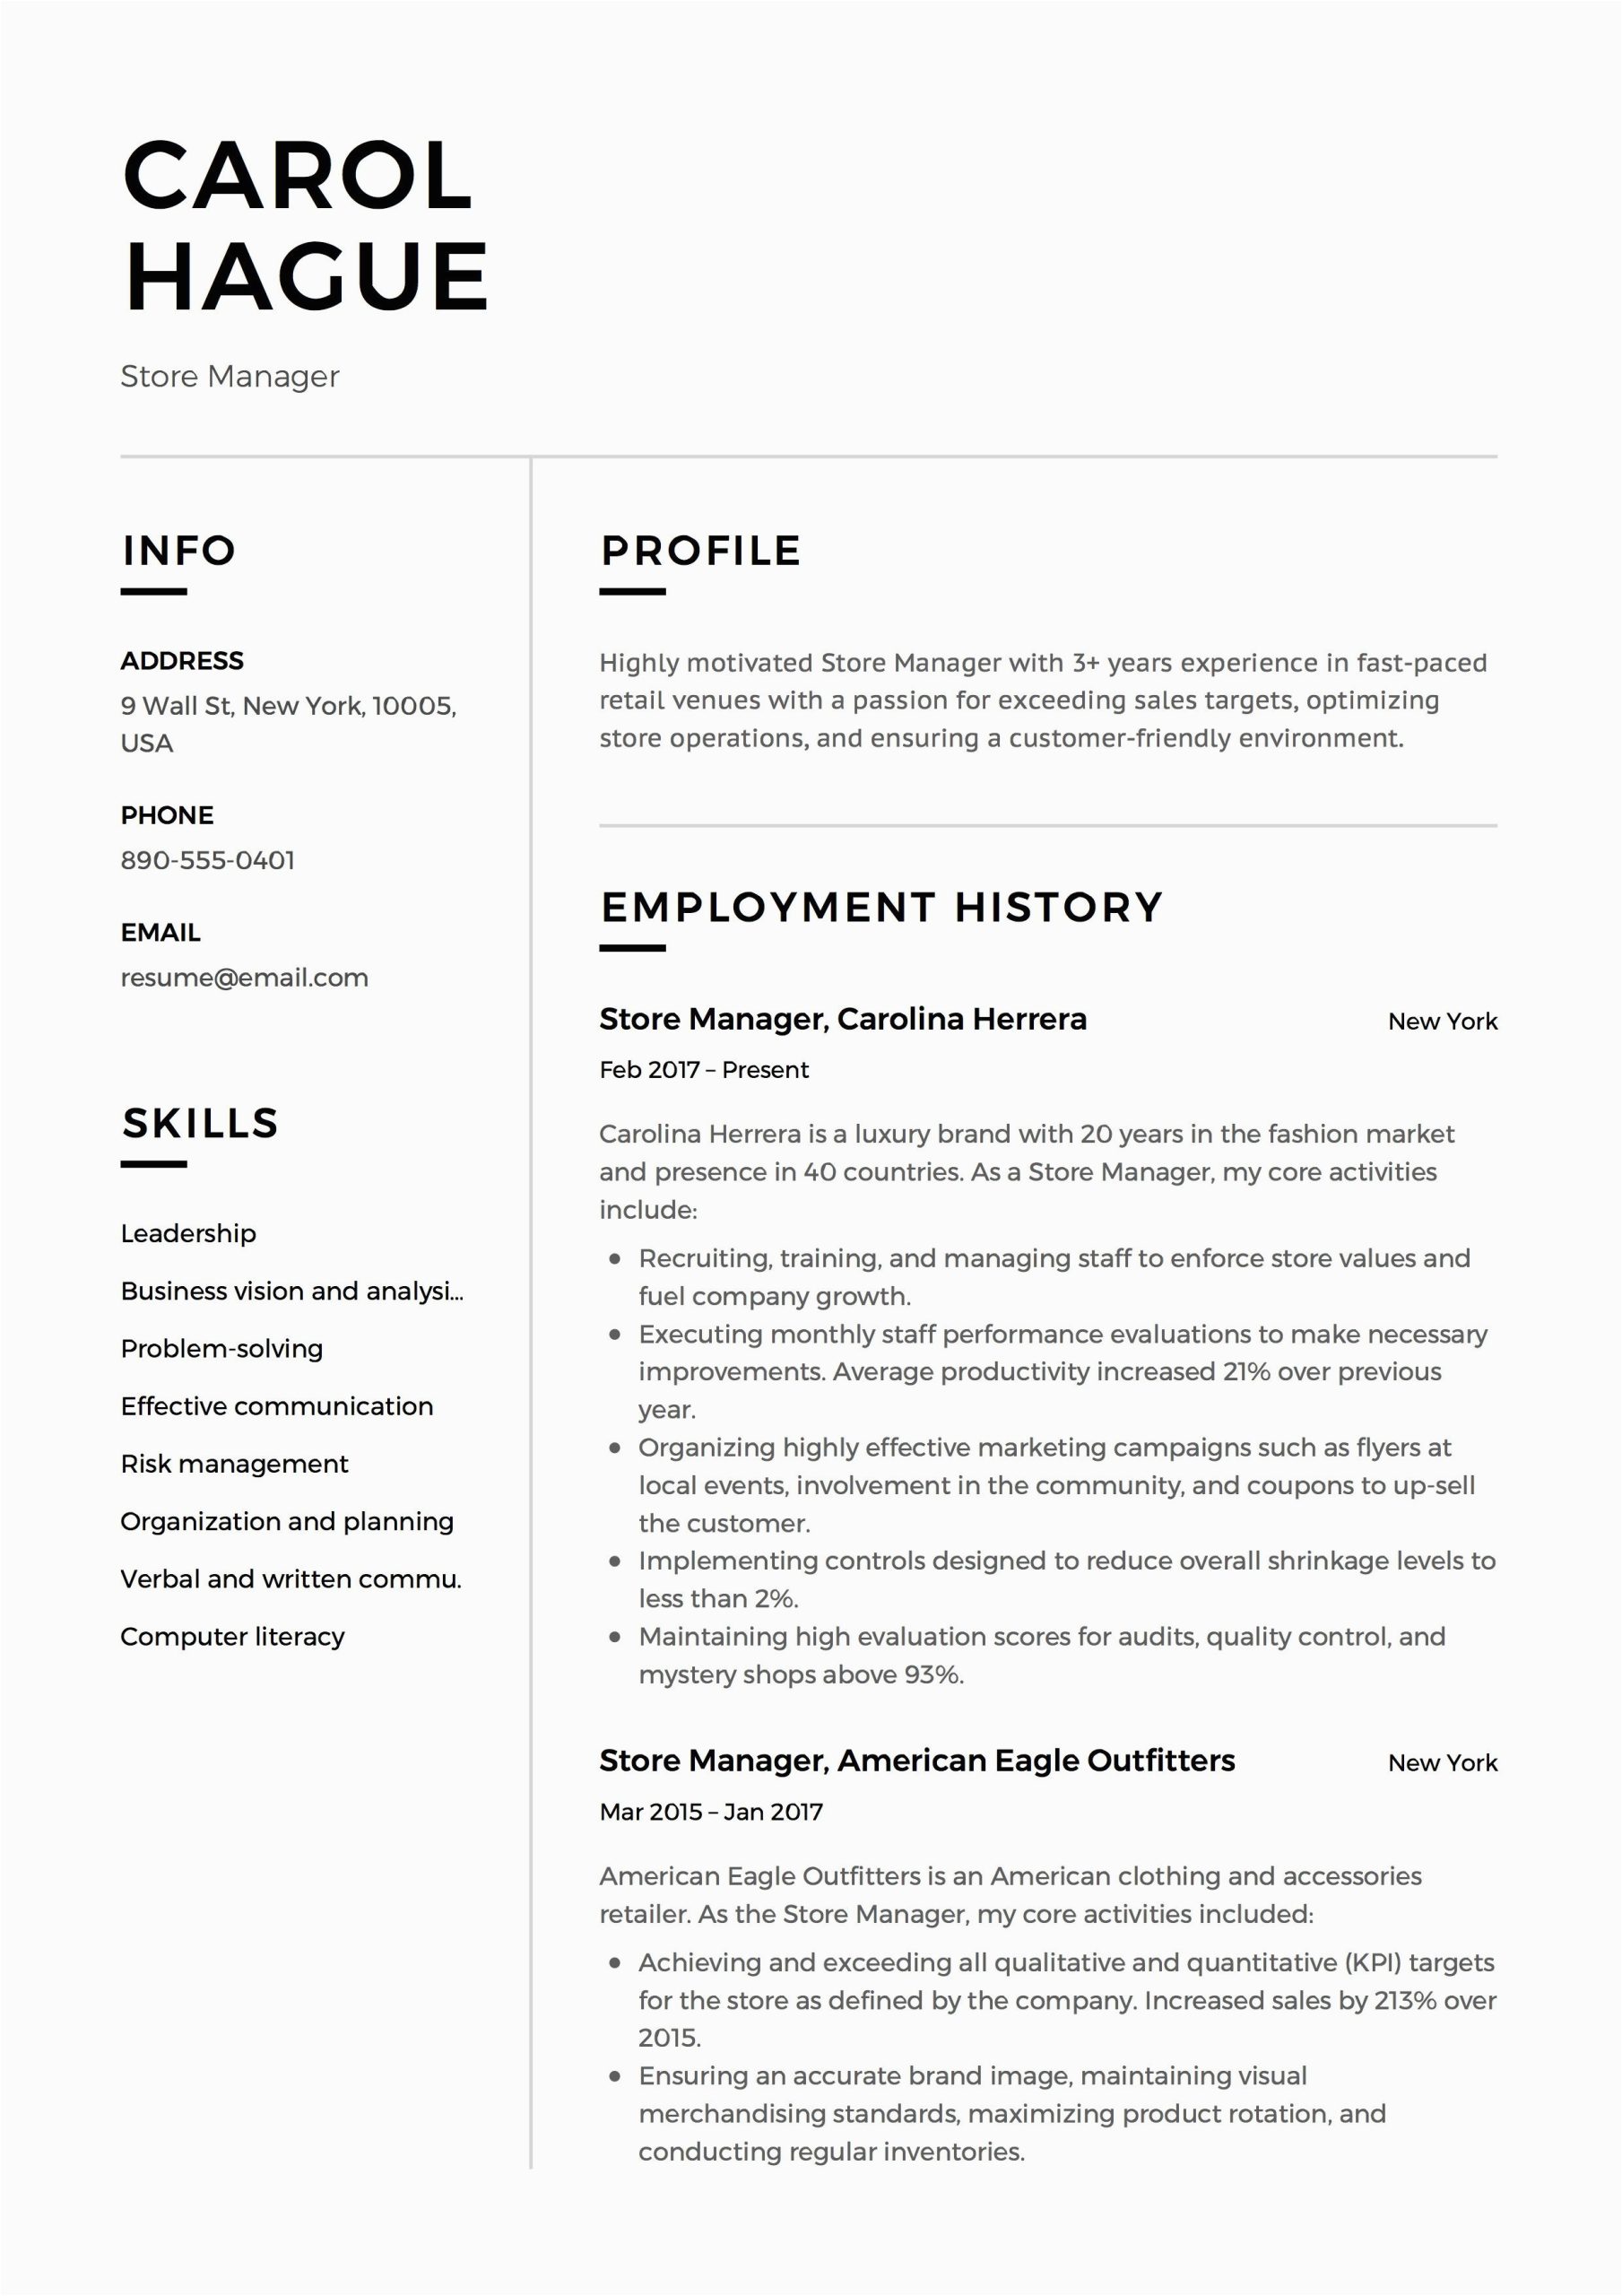 Free Resume Samples for Retail Management Store Manager Resume Sample Template Example Cv formal Design